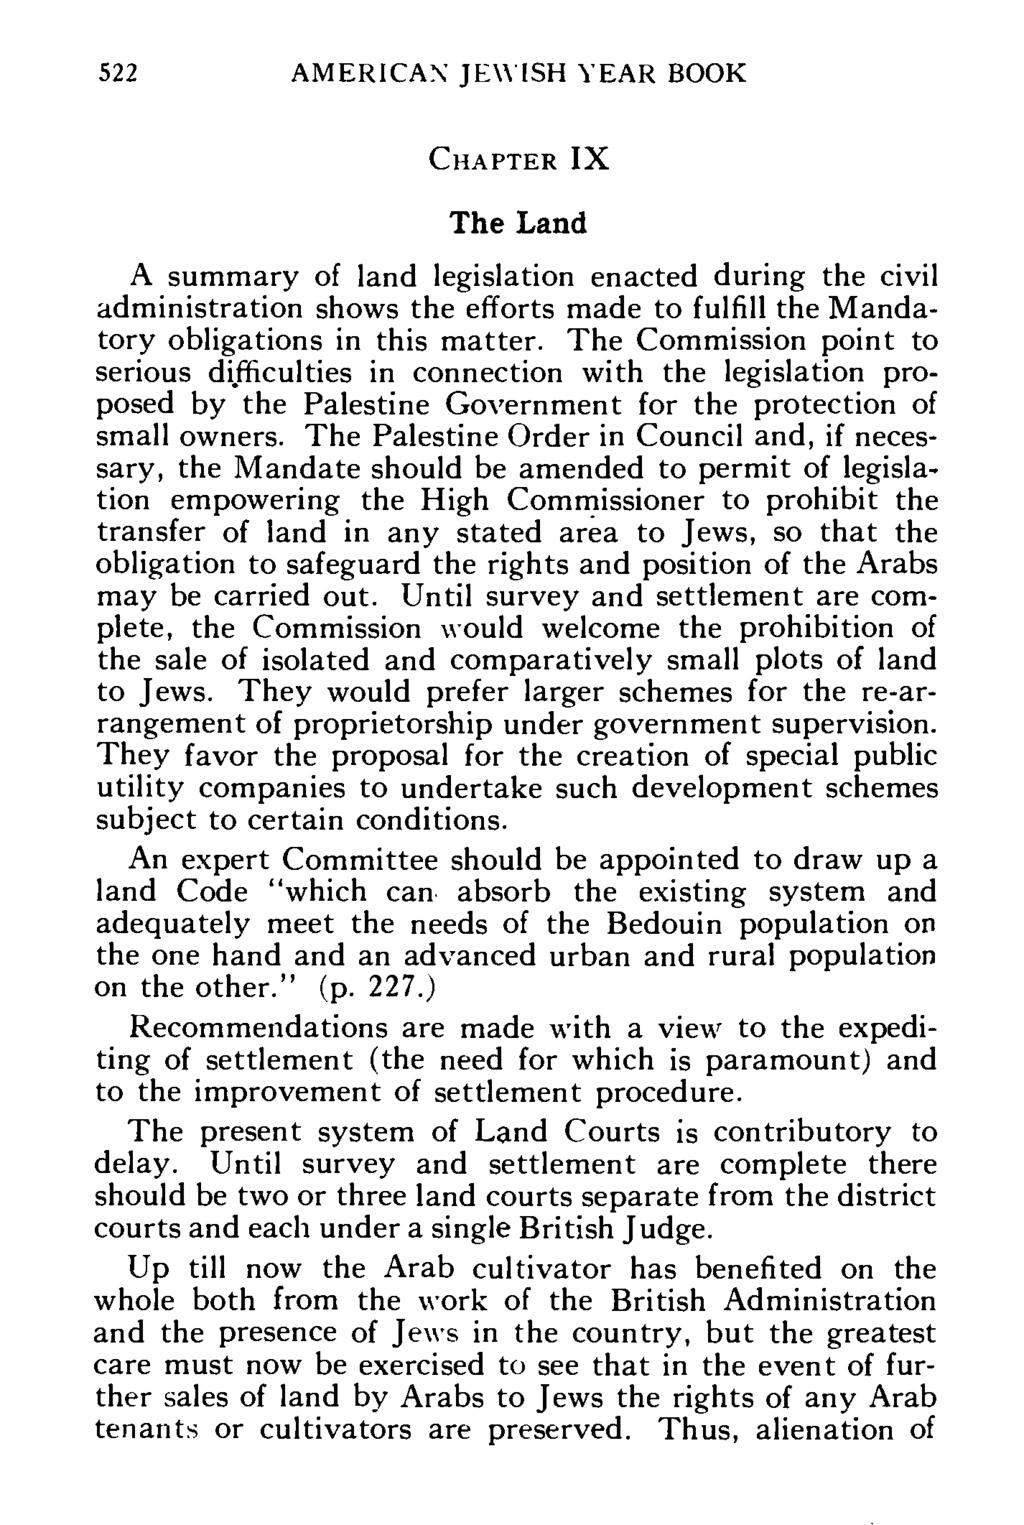 522 AMERICAN JEWISH YEAR BOOK CHAPTER IX The Land A summary of land legislation enacted during the civil administration shows the efforts made to fulfill the Mandatory obligations in this matter.